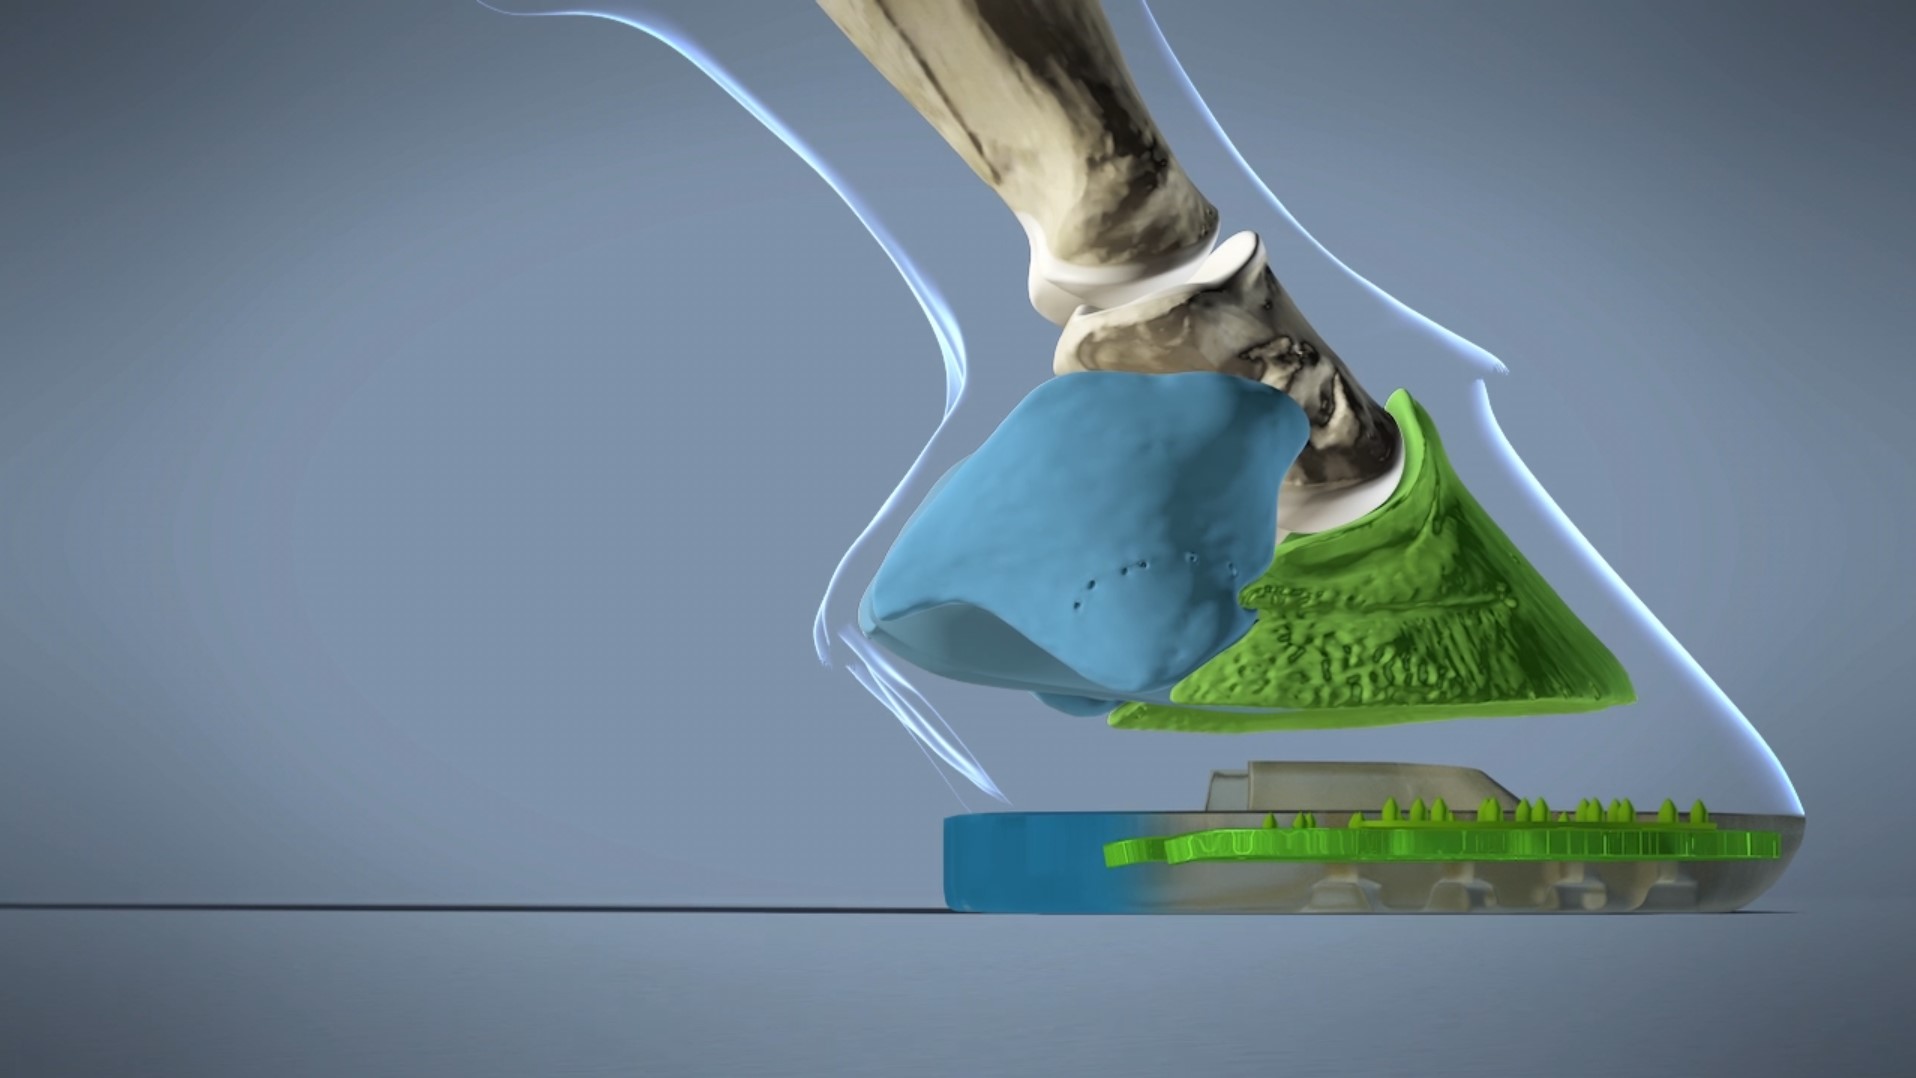 Hoof Anatomy and Composite Shoe - Hard and Soft Components Represented in Blue and Green